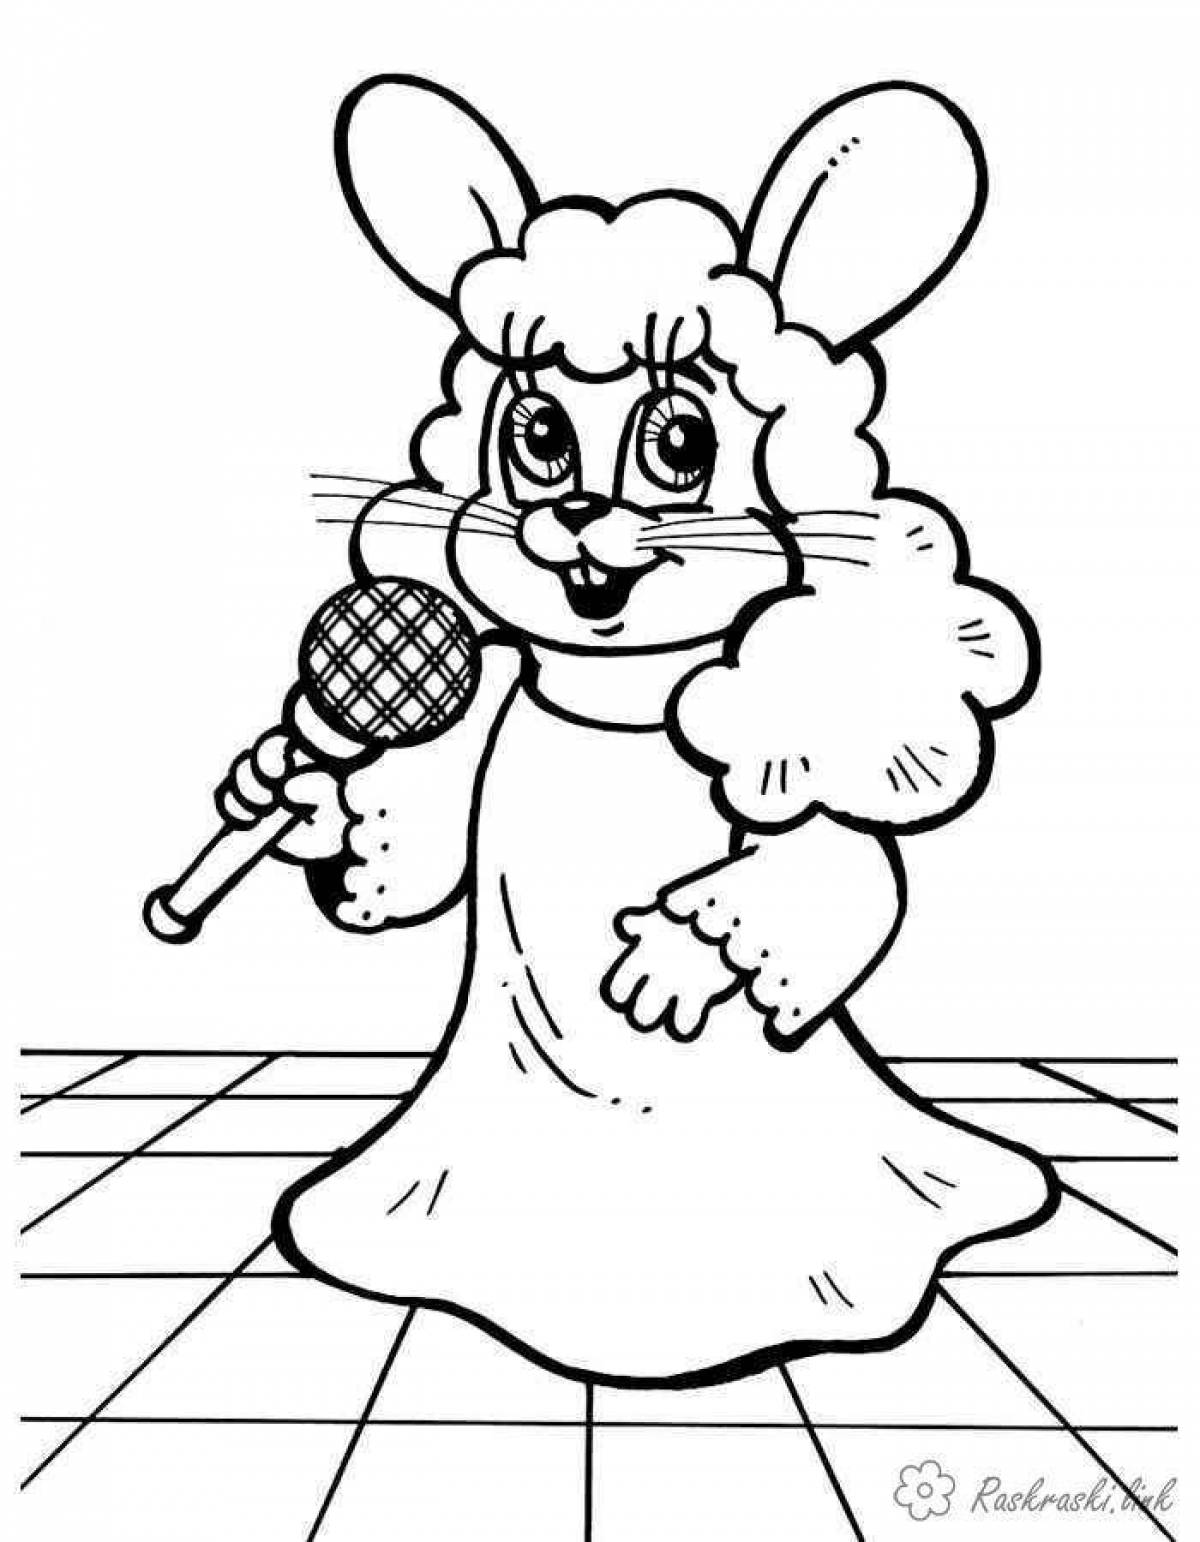 Surprised hare coloring book